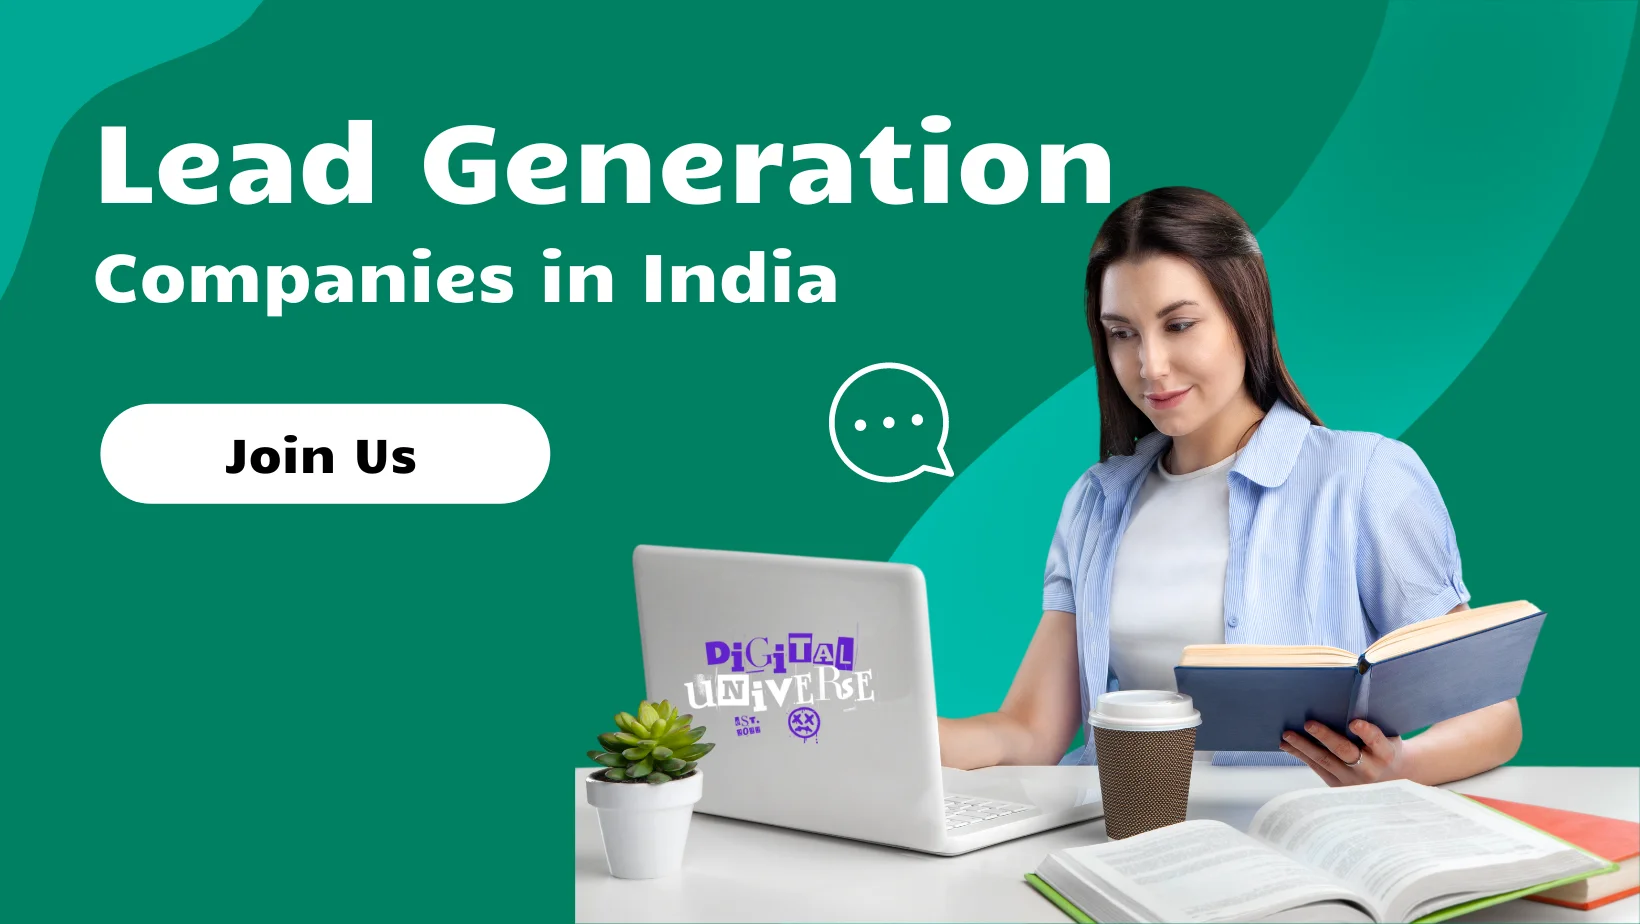 Lead Generation Companies in India